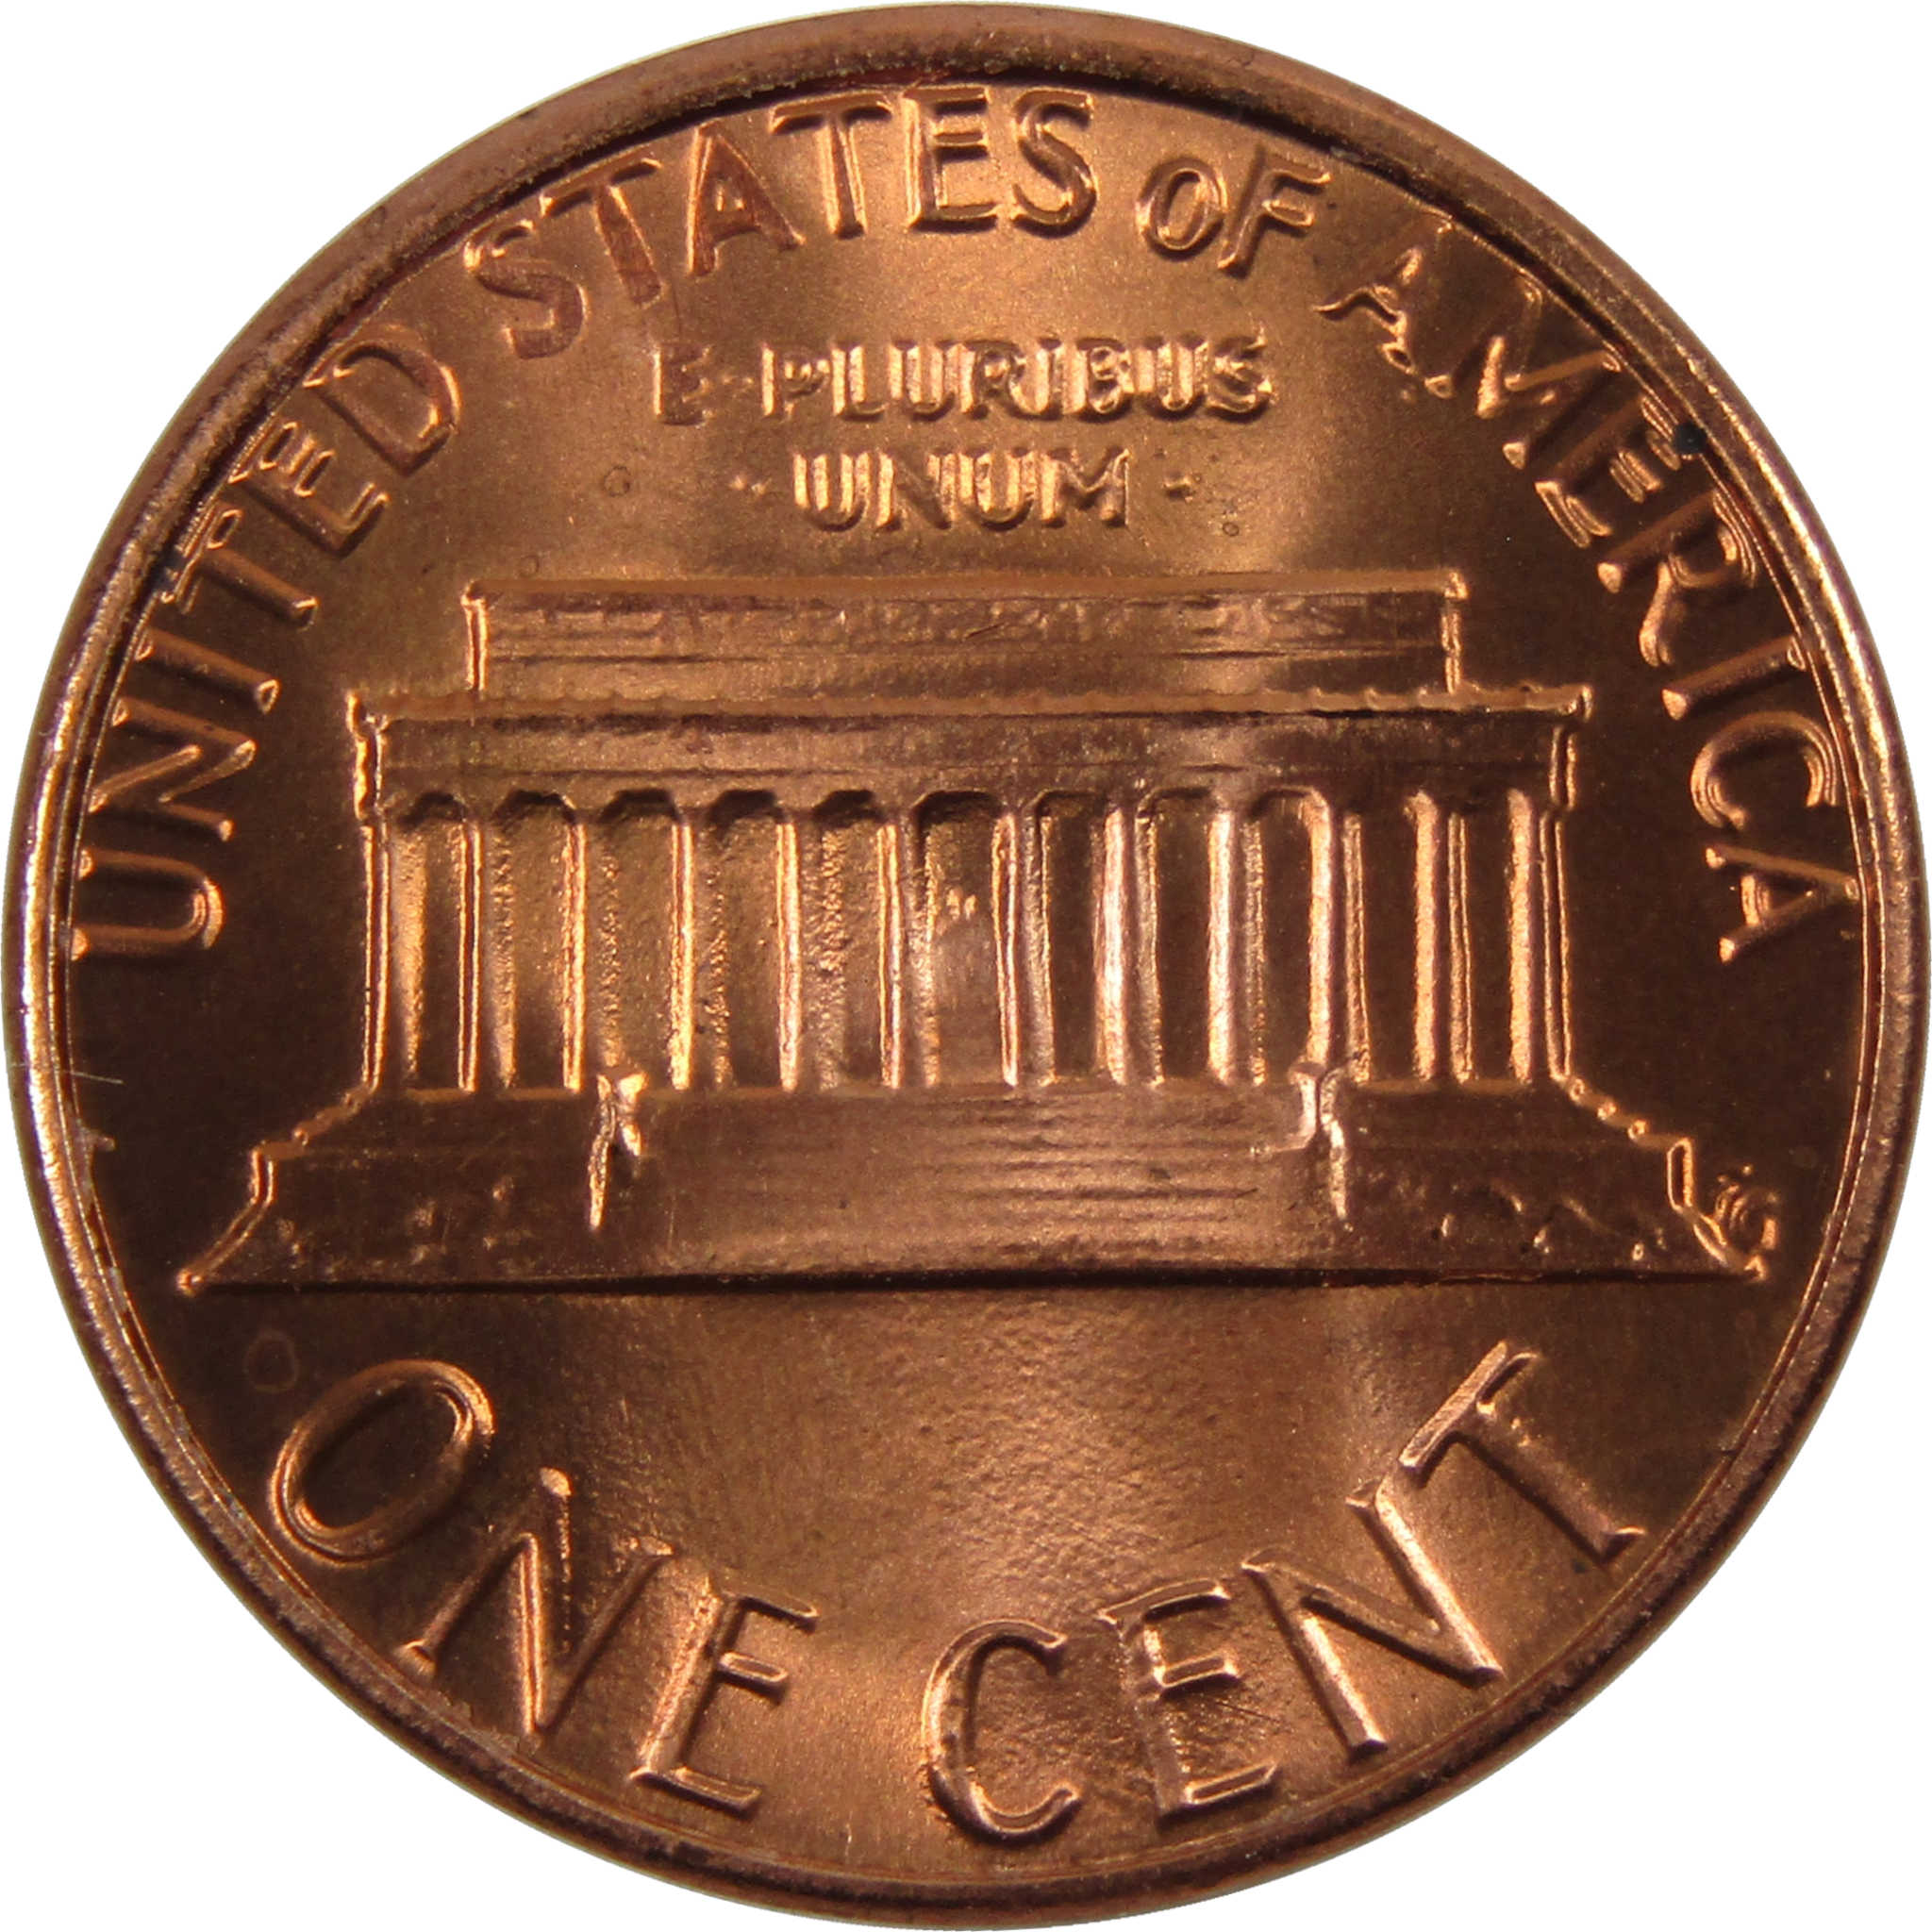 1982 Large Date Lincoln Memorial Cent BU Uncirculated Penny 1c Coin